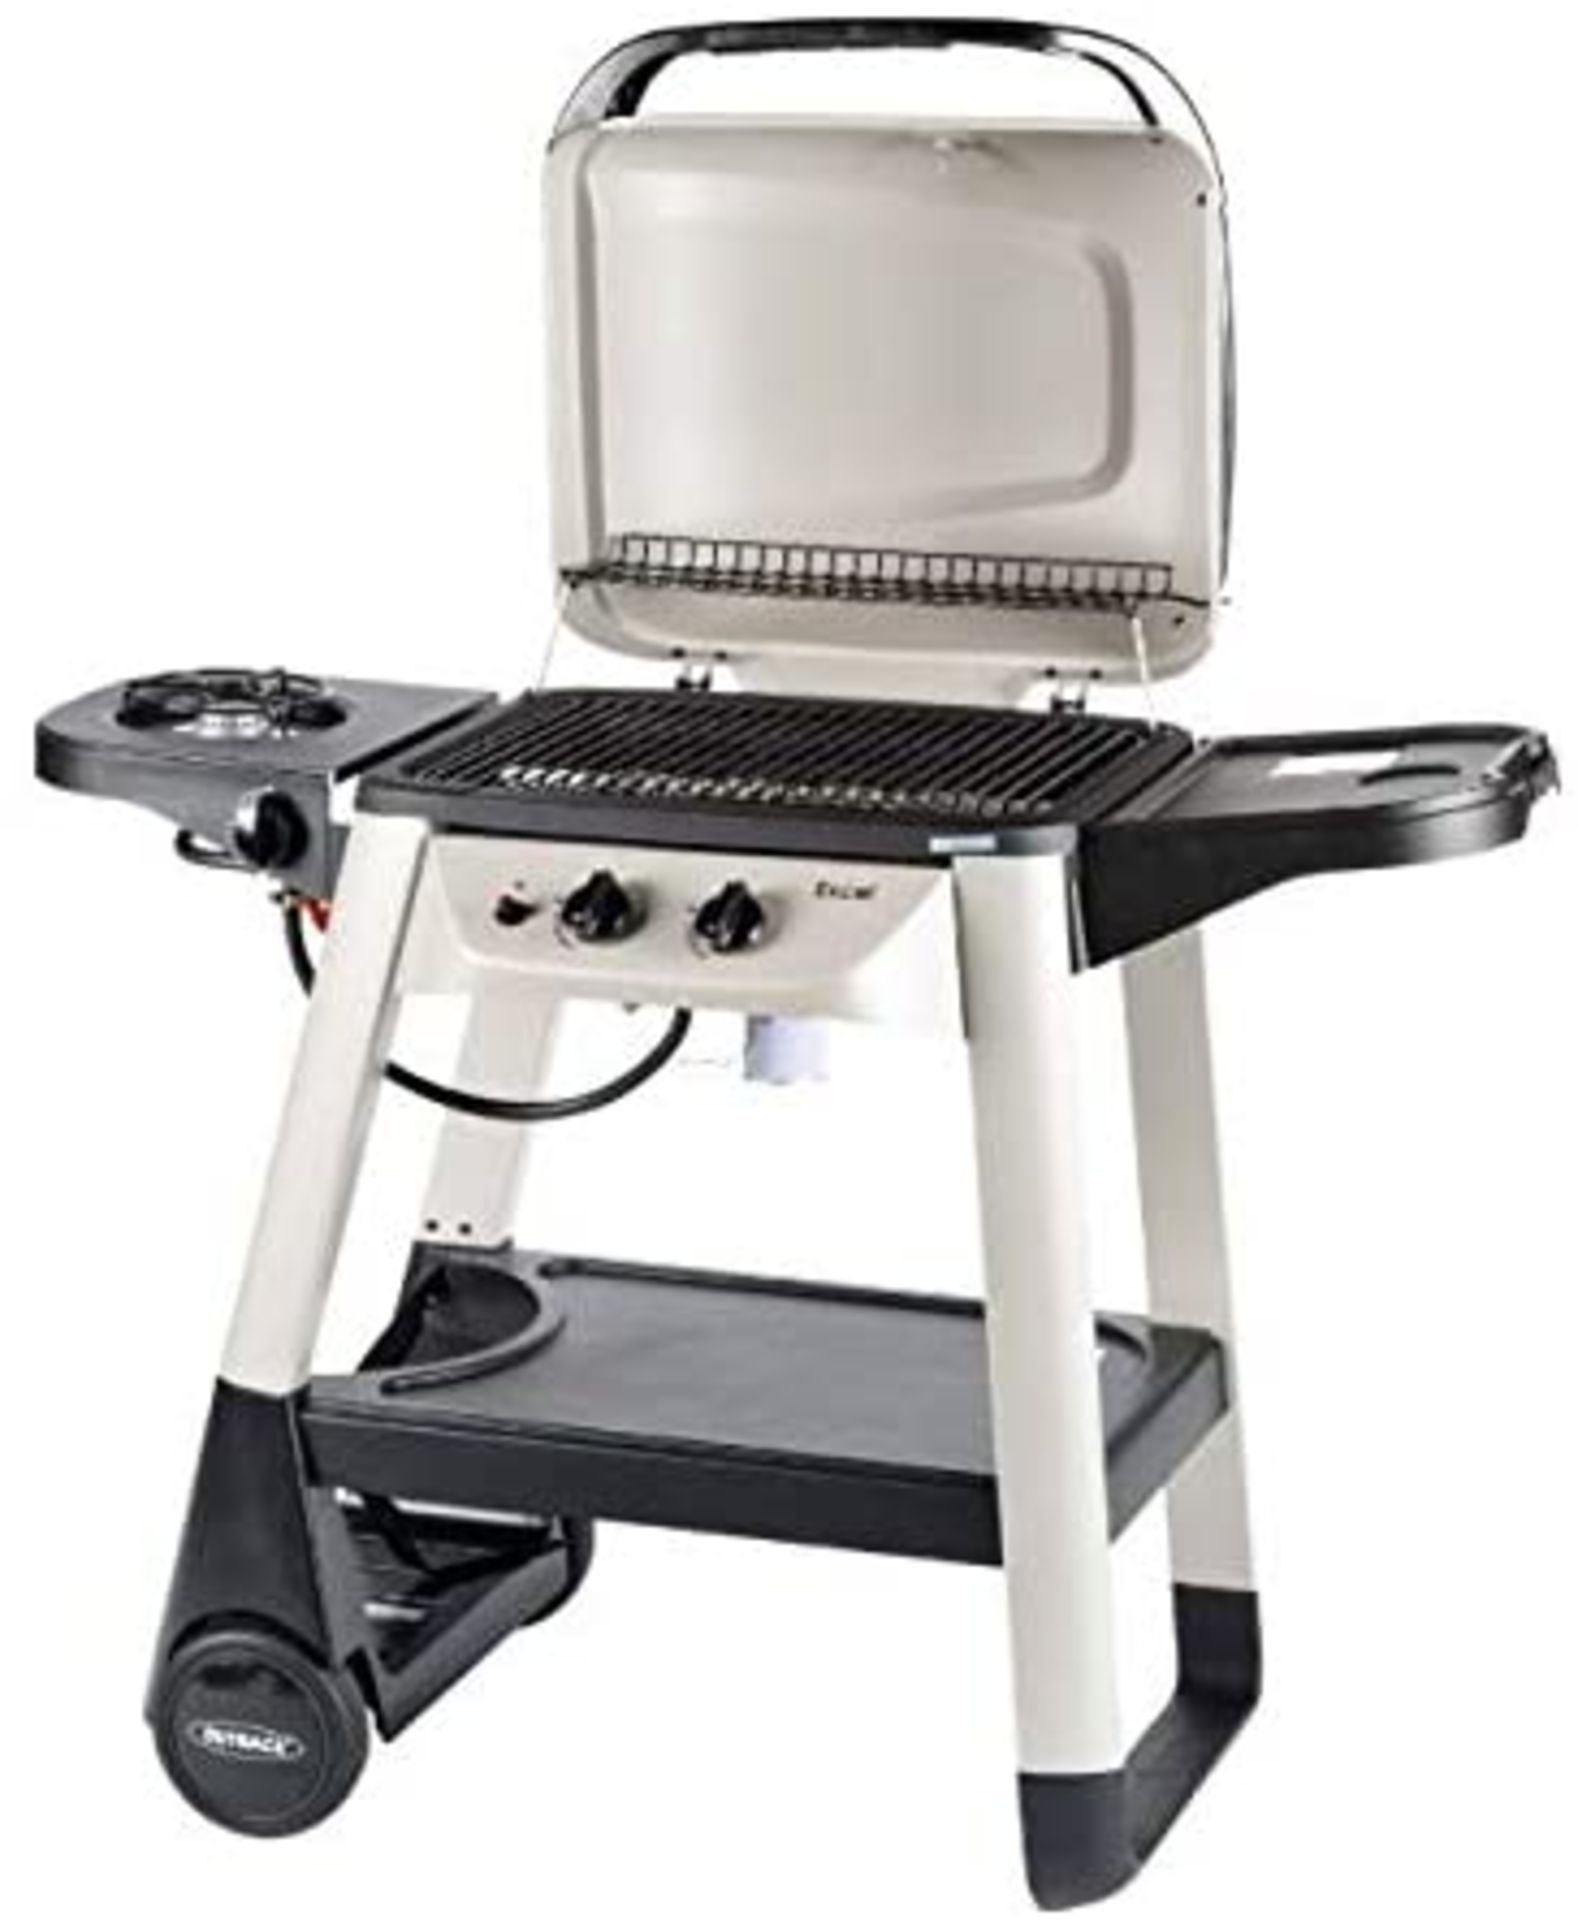 (P9) 1x Outback Excel 310 Gas BBQ Silver RRP £100. - Image 2 of 3